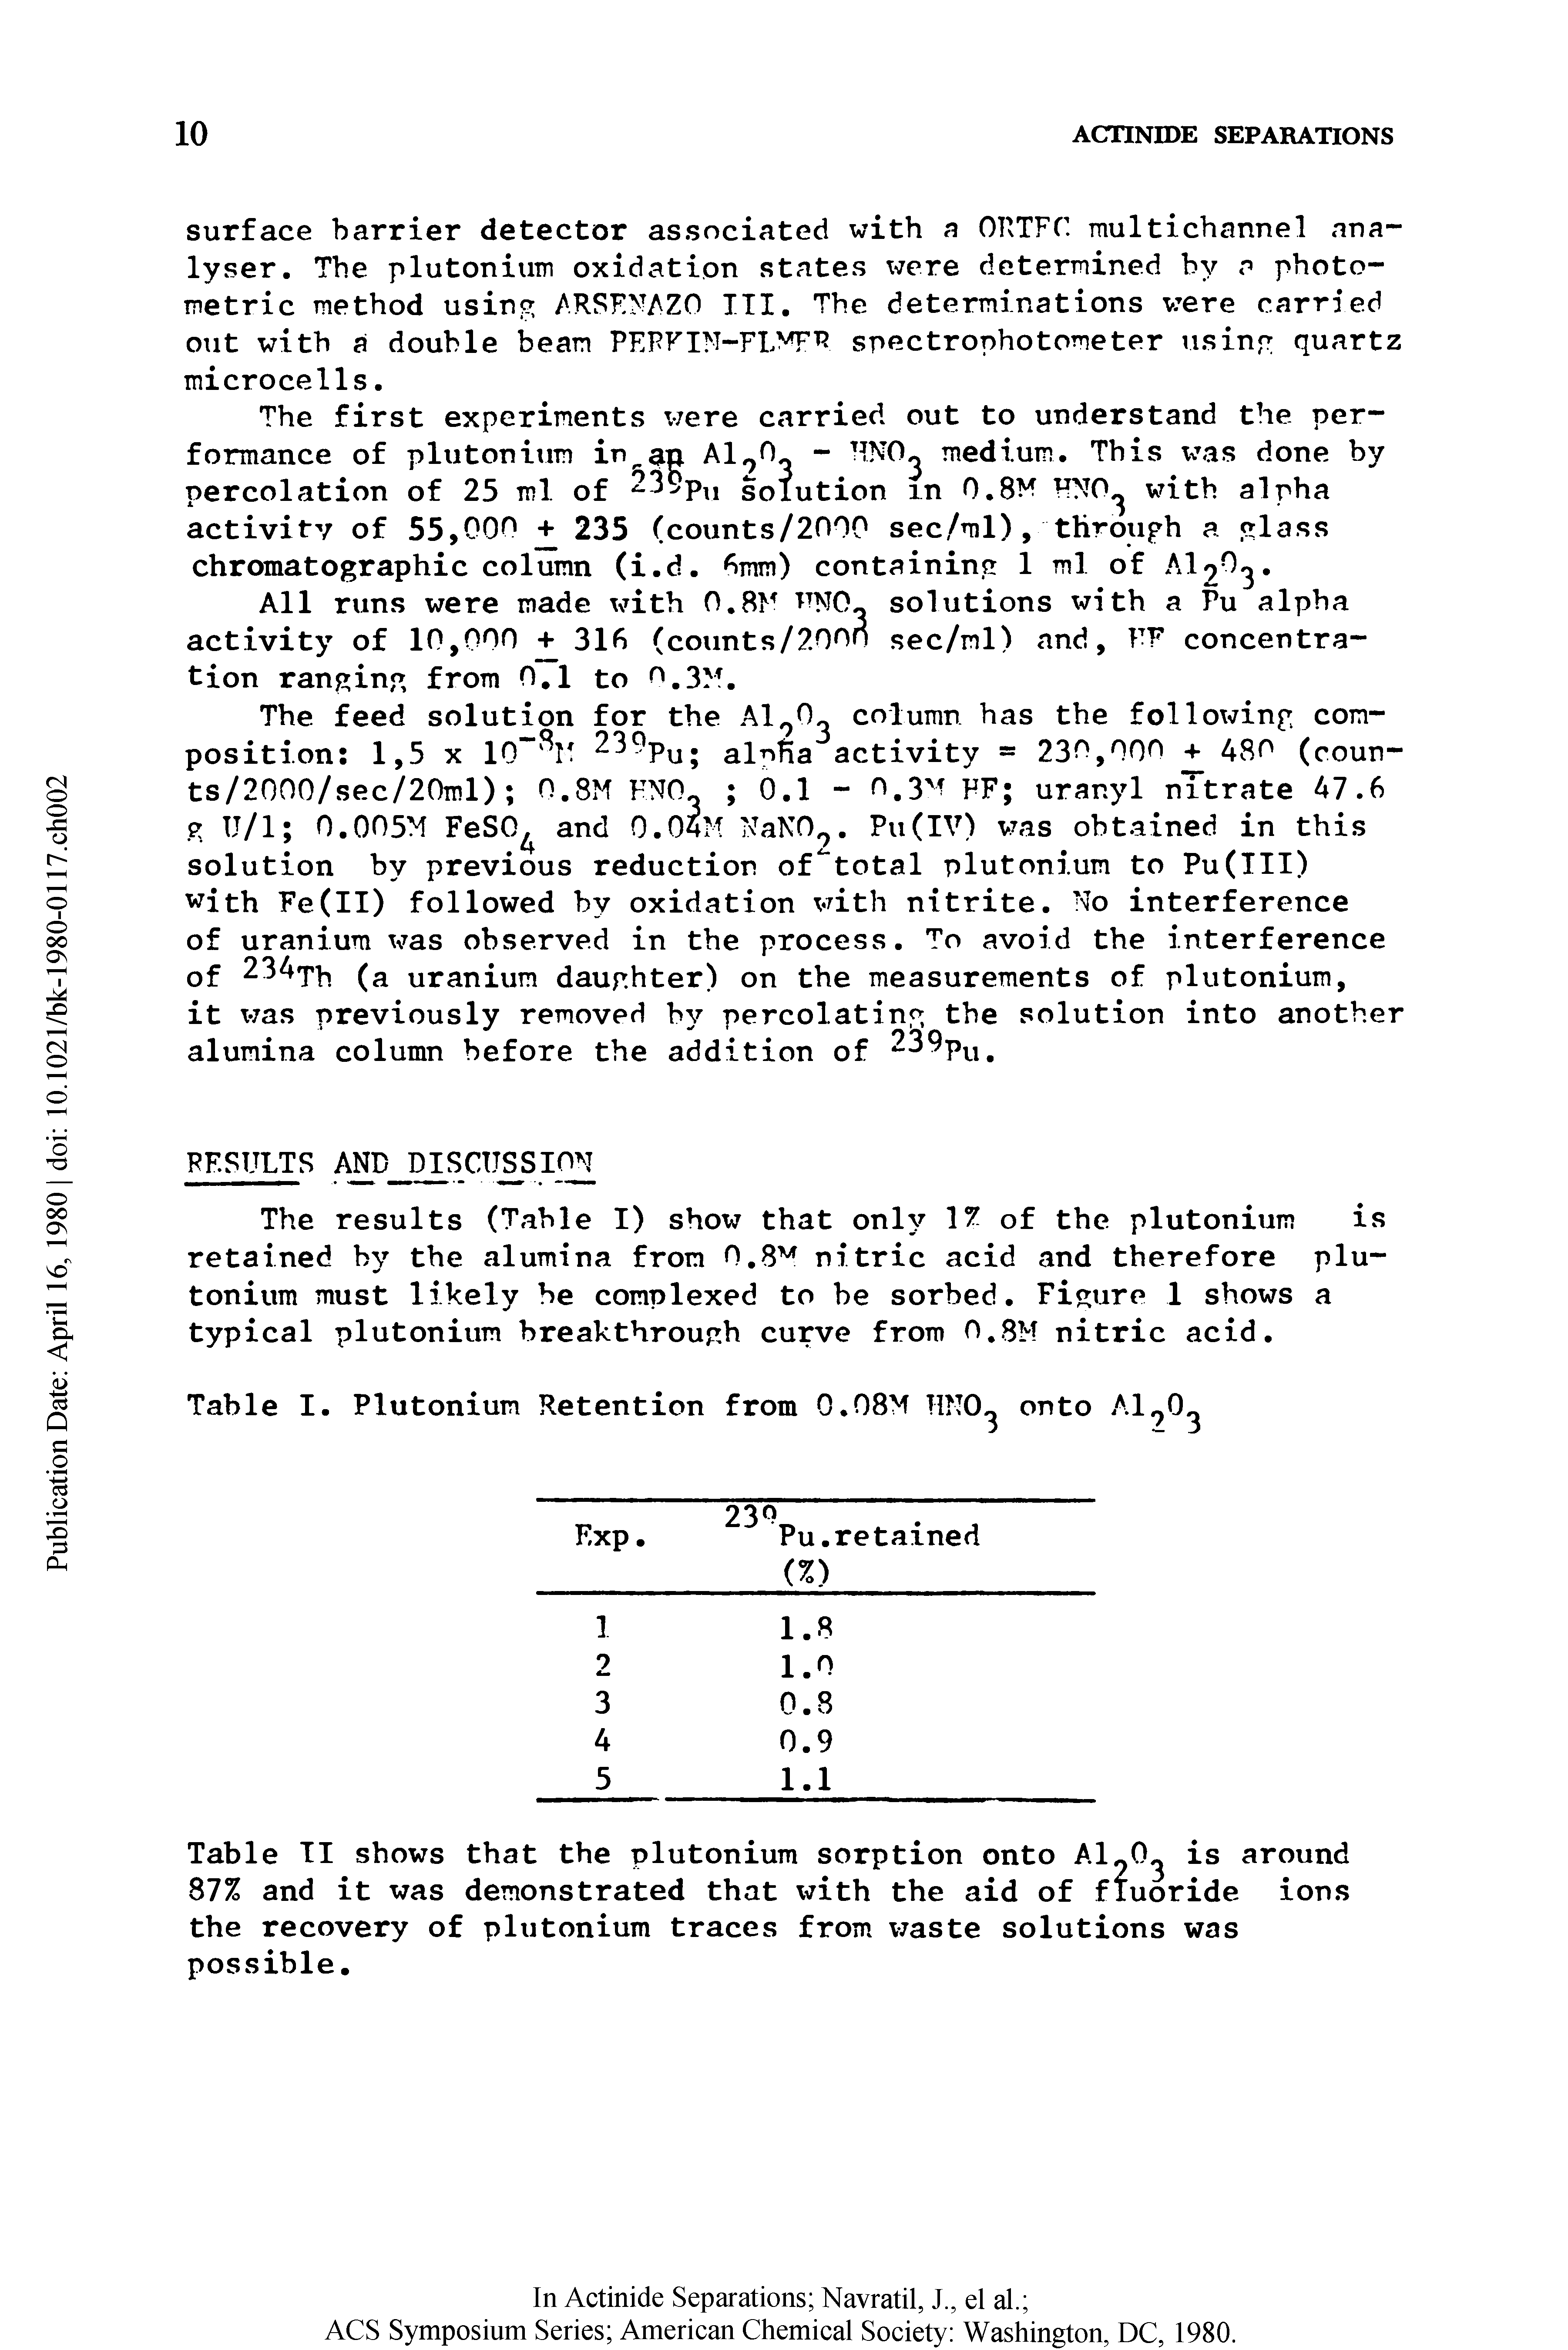 Table II shows that the plutonium sorption onto A190 is around 87% and it was demonstrated that with the aid of fluoride ions the recovery of plutonium traces from waste solutions was possible.